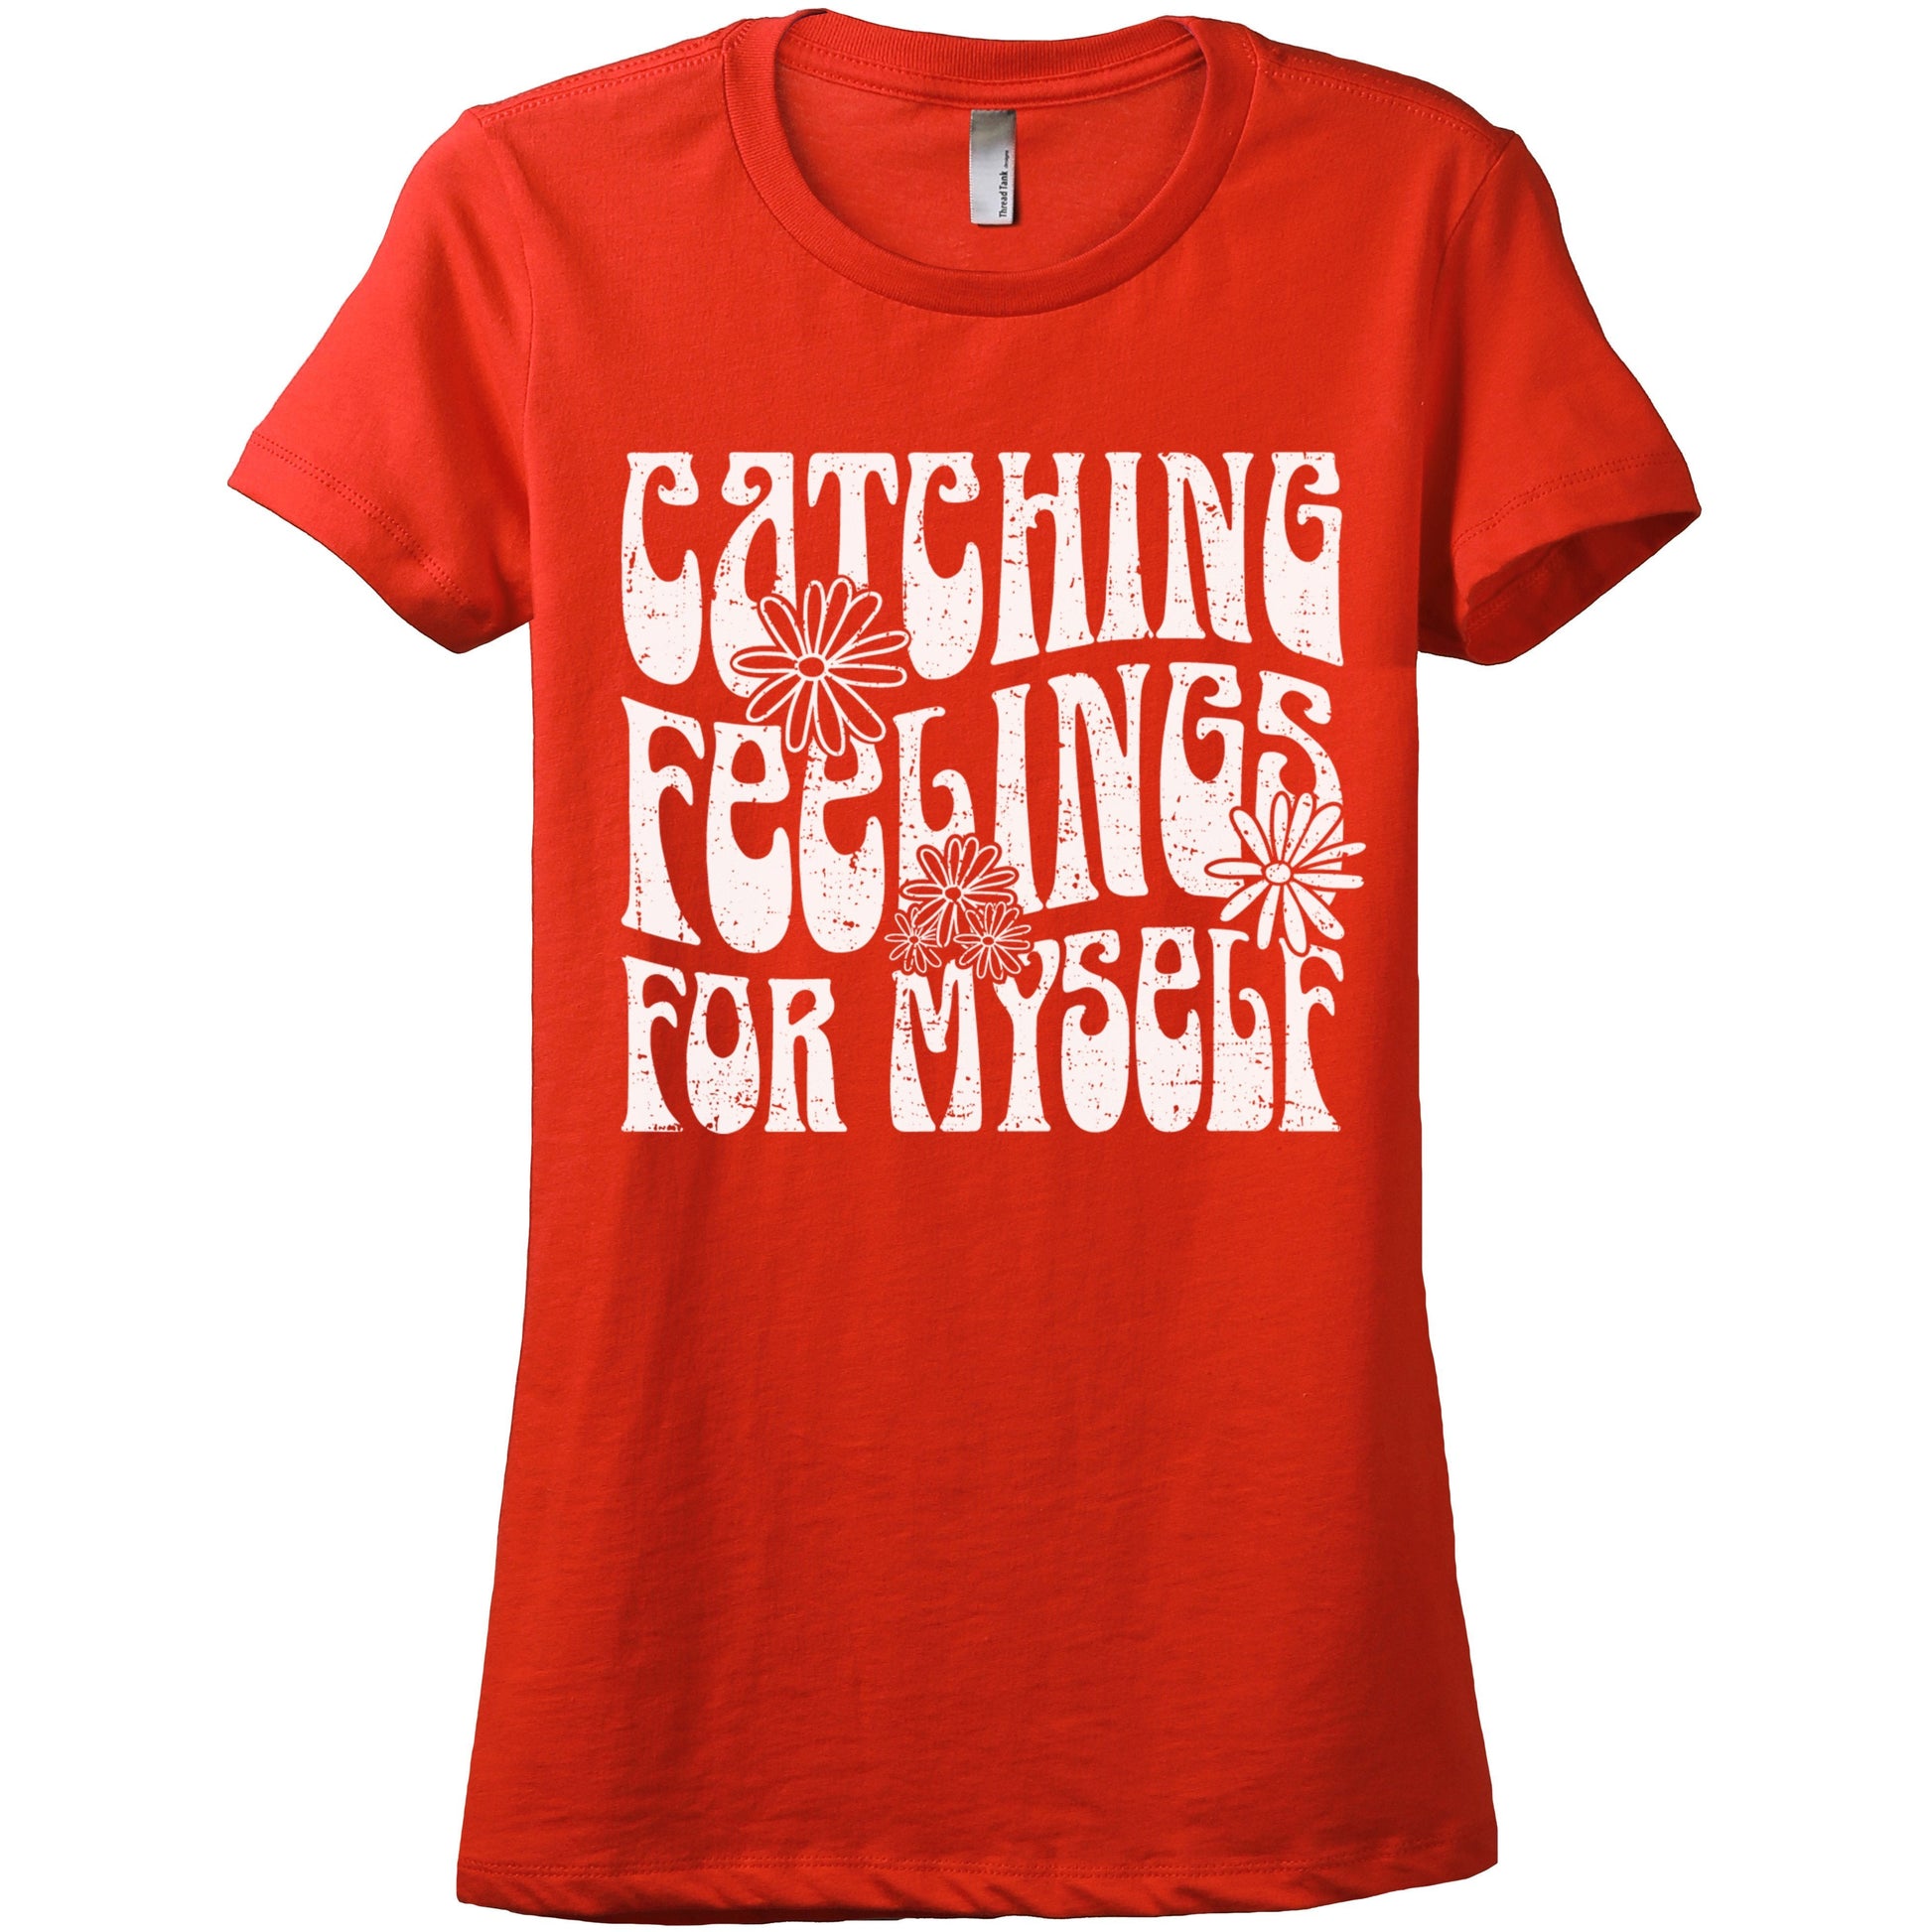 Catching Feelings For Myself Women's Relaxed Crewneck T-Shirt Top Tee Poppy Grey
